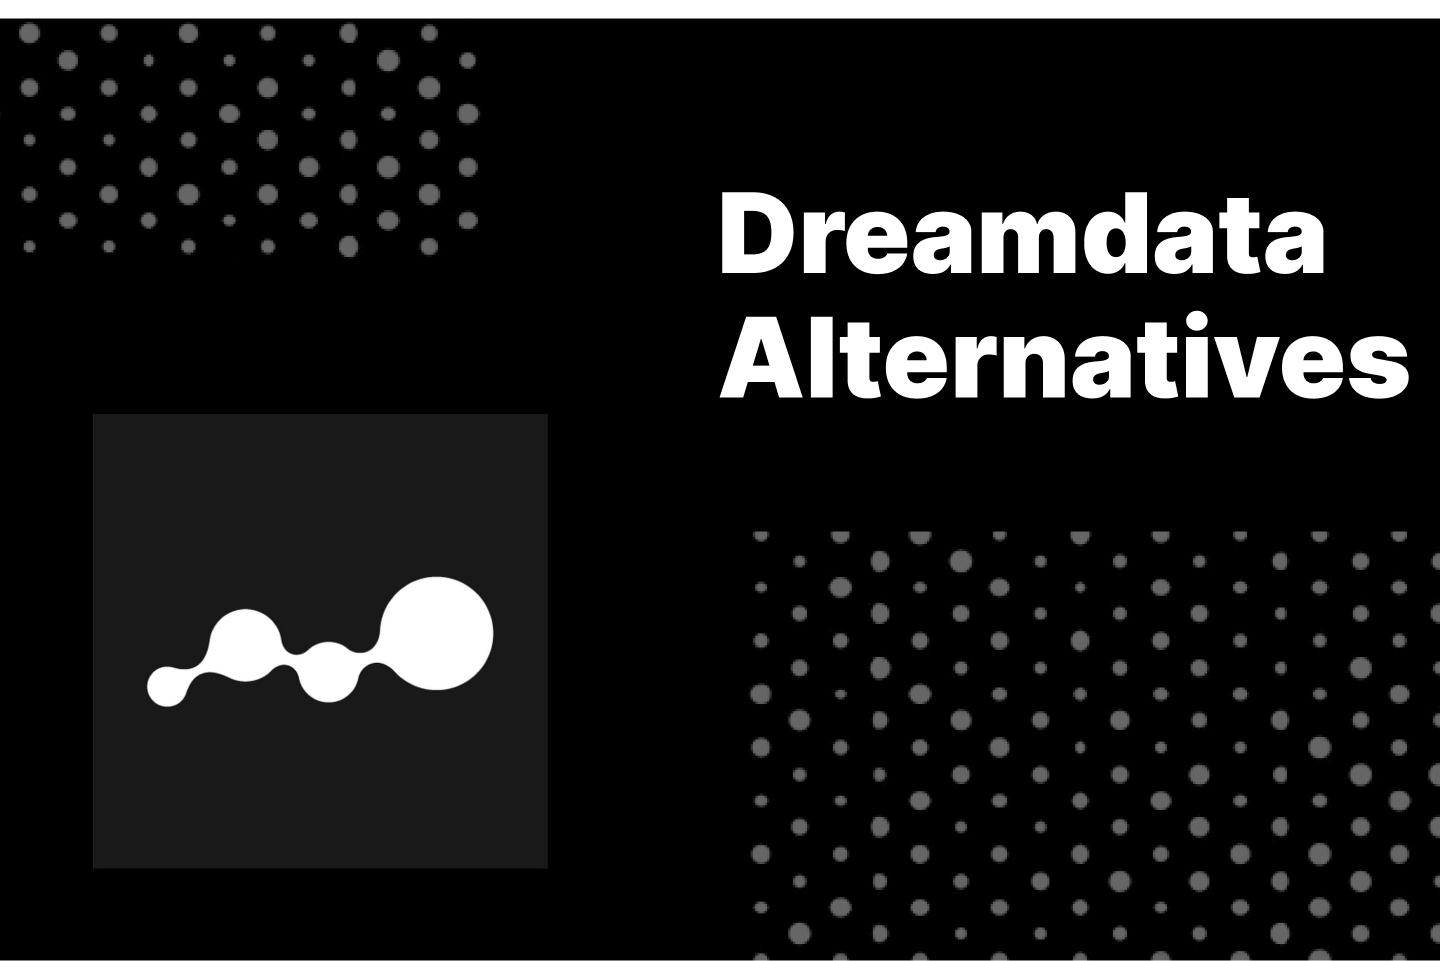 Top 6 Dreamdata Alternatives That Will Boost Your MRR